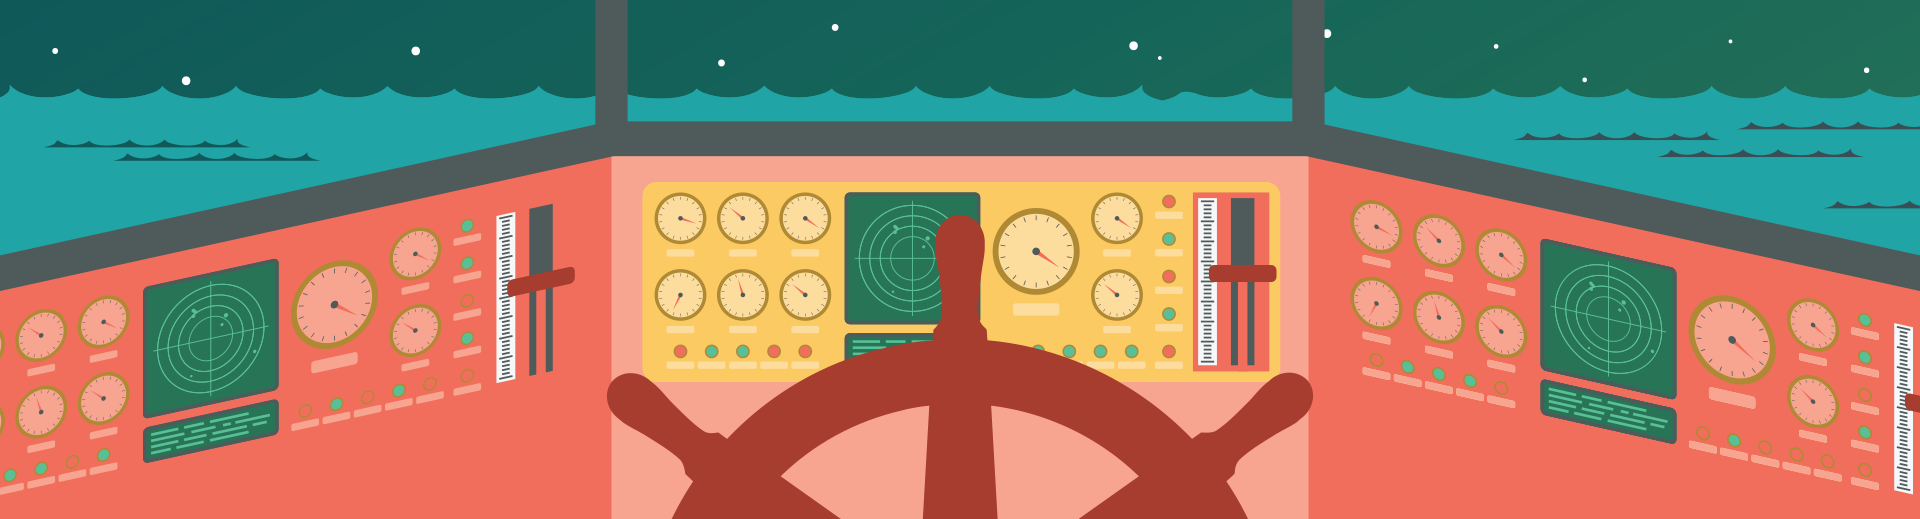 An illustration of the cockpit of a ship with various dials and buttons and the Kubernetes wheel in the foreground